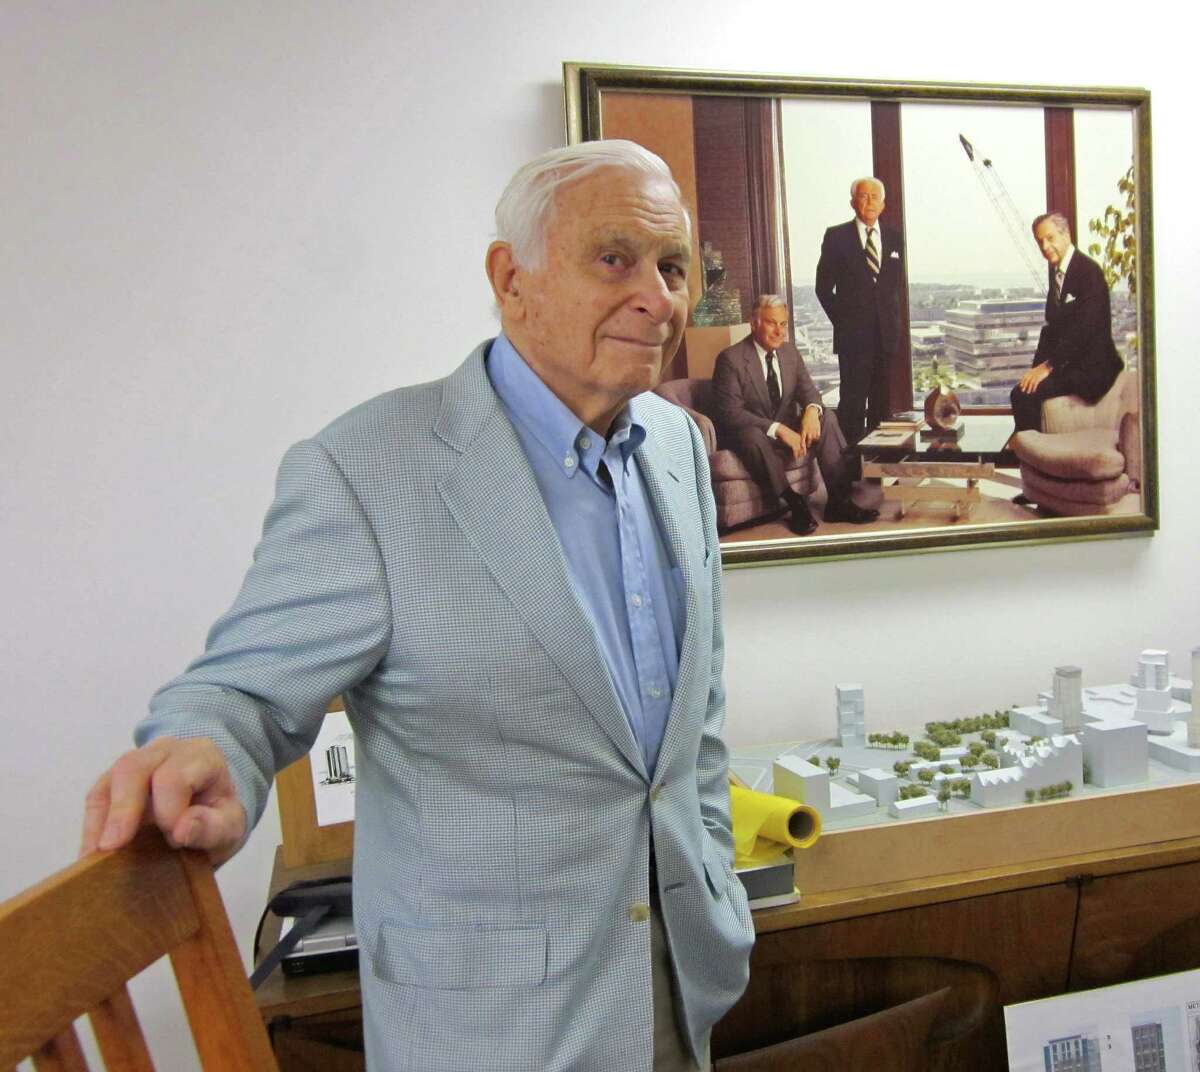 Robert N. Rich in his office on Summer Street in downtown Stamford in August 2012. Behind Rich is an image of him, on the left, with his father, F.D. Rich Sr., center, and brother F.D. Rich Jr. Robert N. Rich died Saturday, Nov. 17, 2012 at his Shippan Point home in Stamford at age 84 after a brief battle with leukemia.